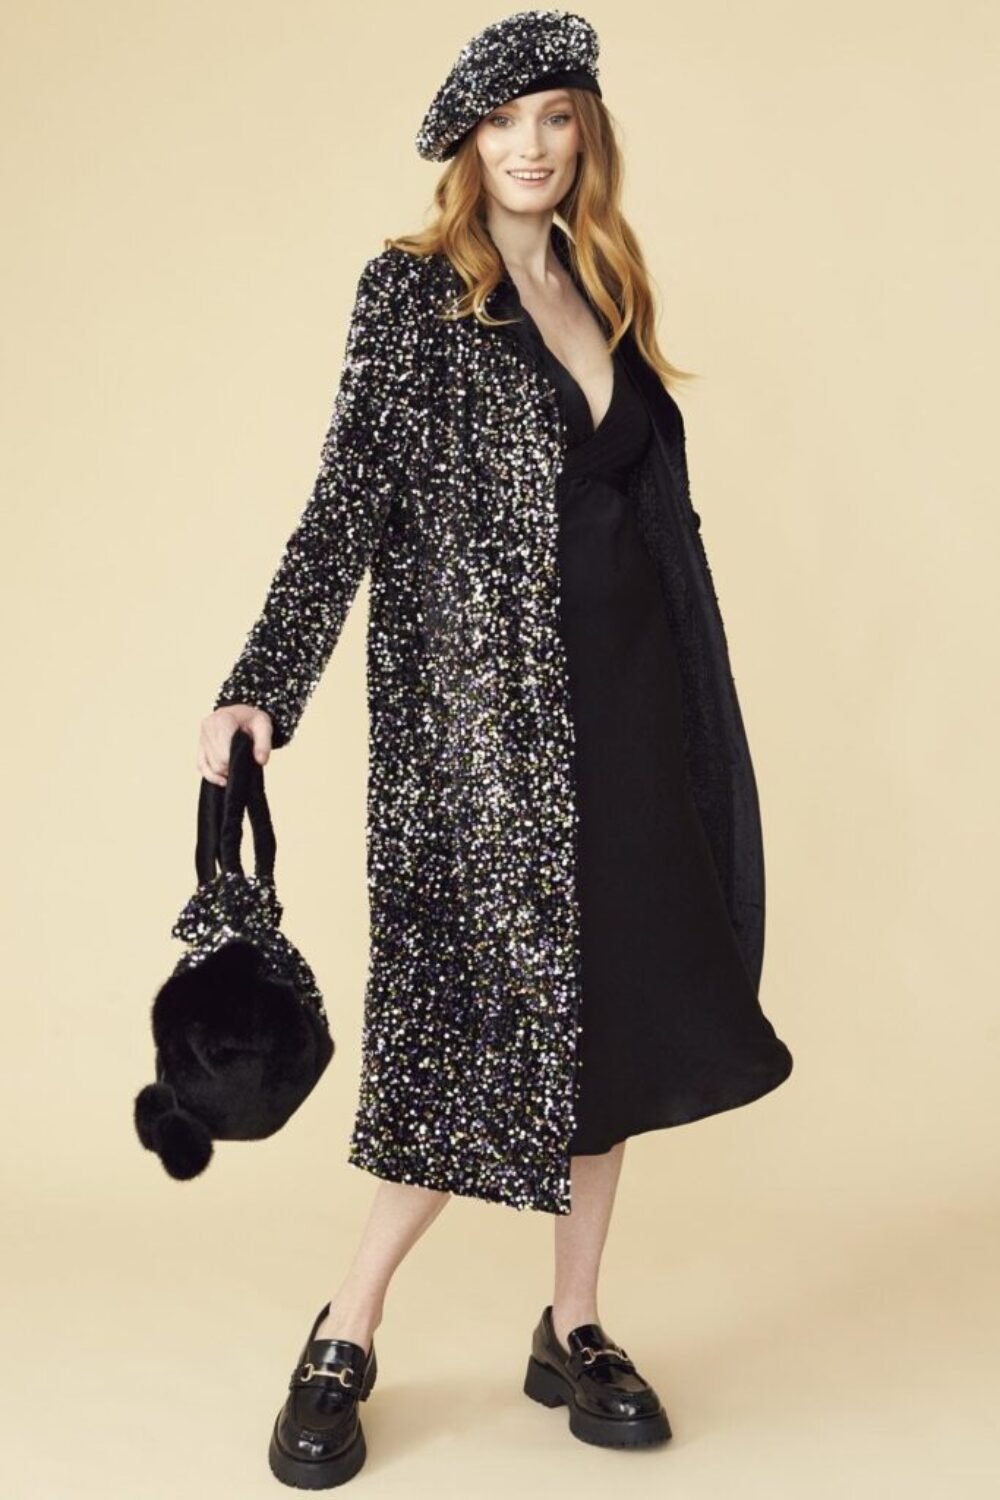 Shop Lux Black Sequin Velvet Trench Coat and women's luxury and designer clothes at www.lux-apparel.co.uk